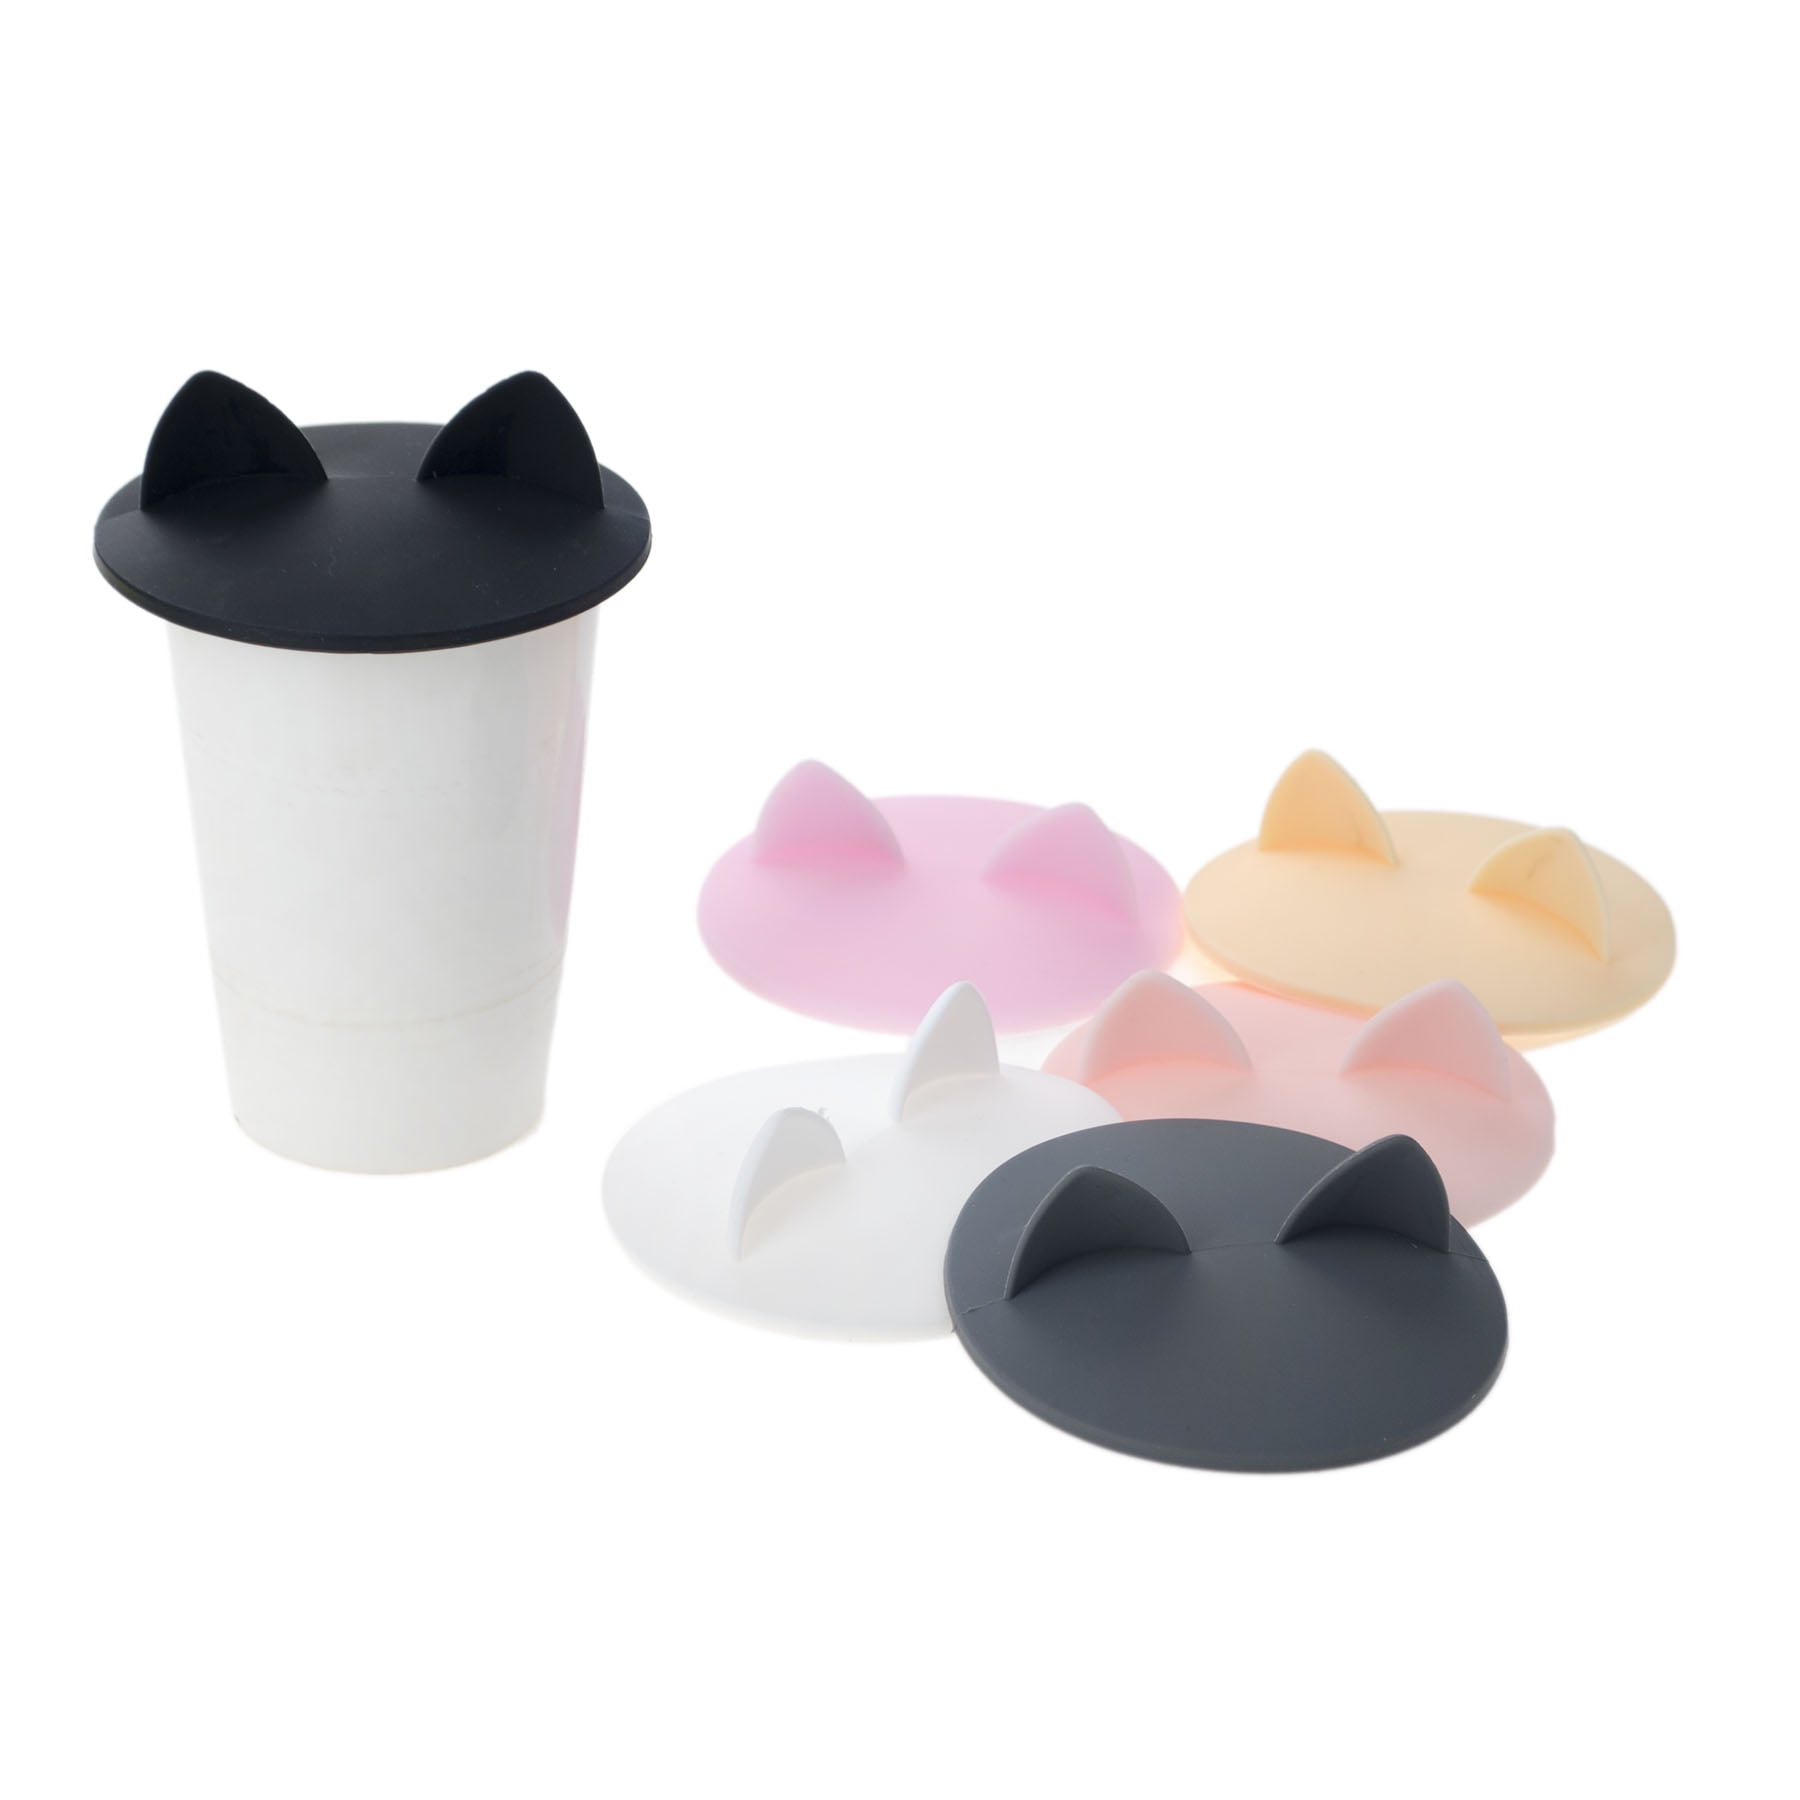 Anti-Dust Food-grade Silicone Cup Lid with Heart Shape Spoon Stirrer Holder zyurong Silicone Mug Cover